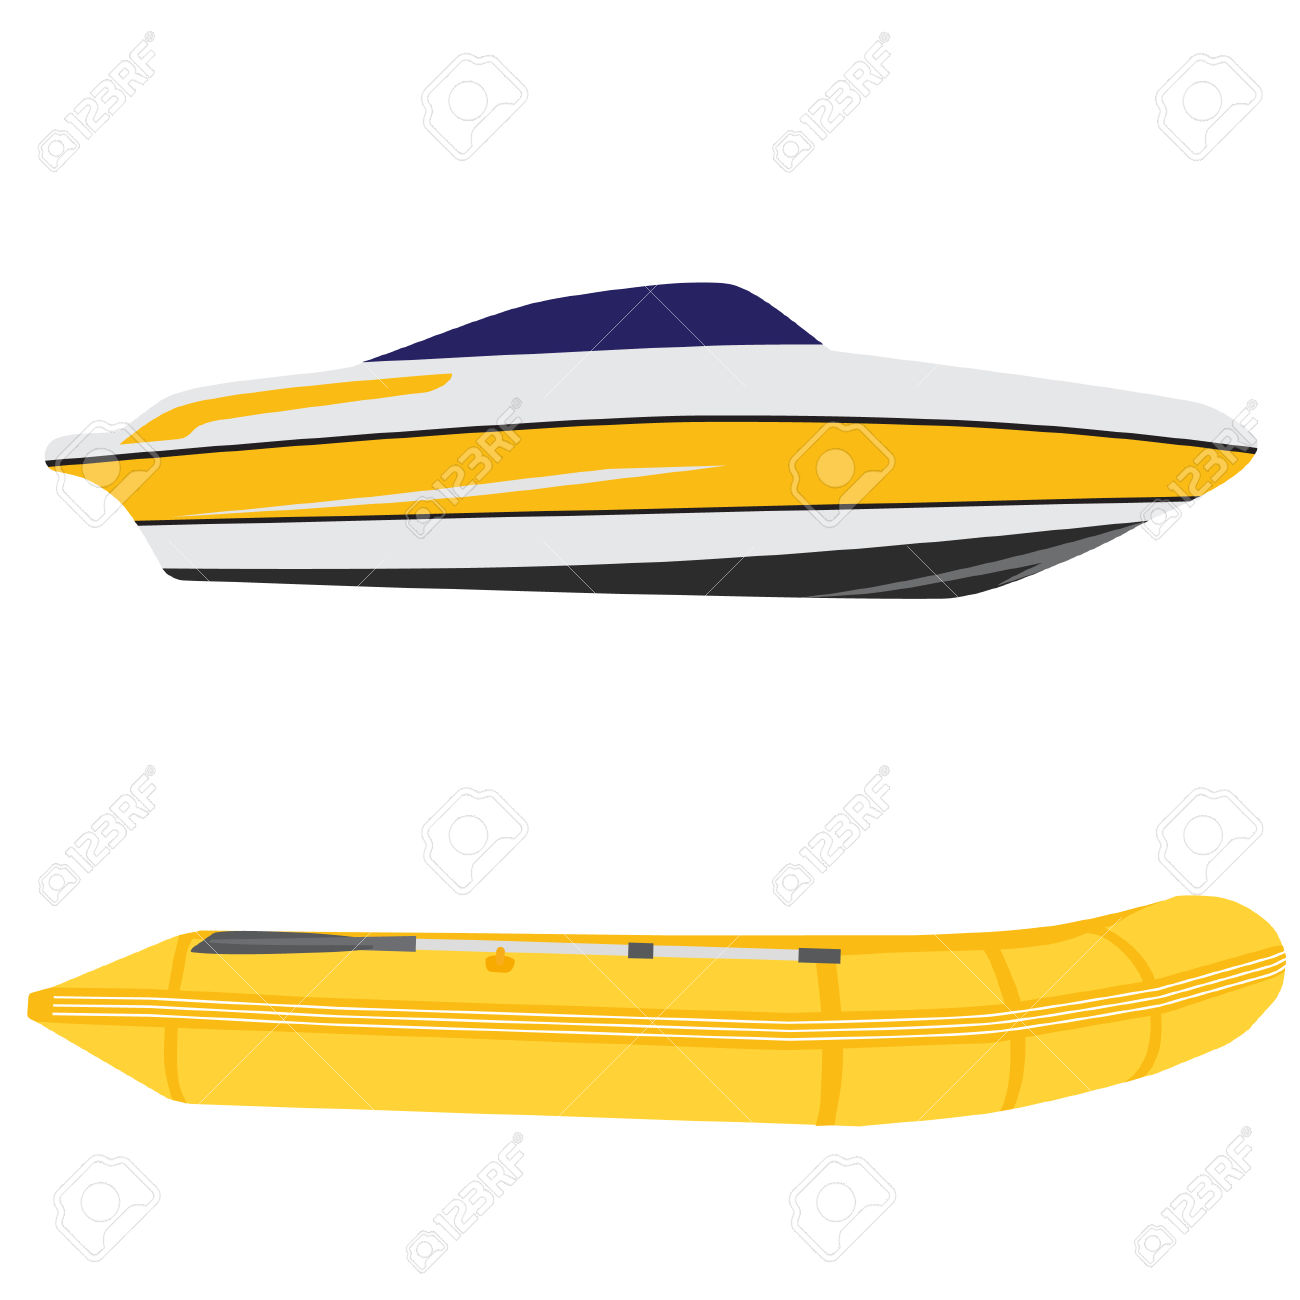 Illustration Of Luxury Yacht And Yellow Rubber Boat, Inflatable.